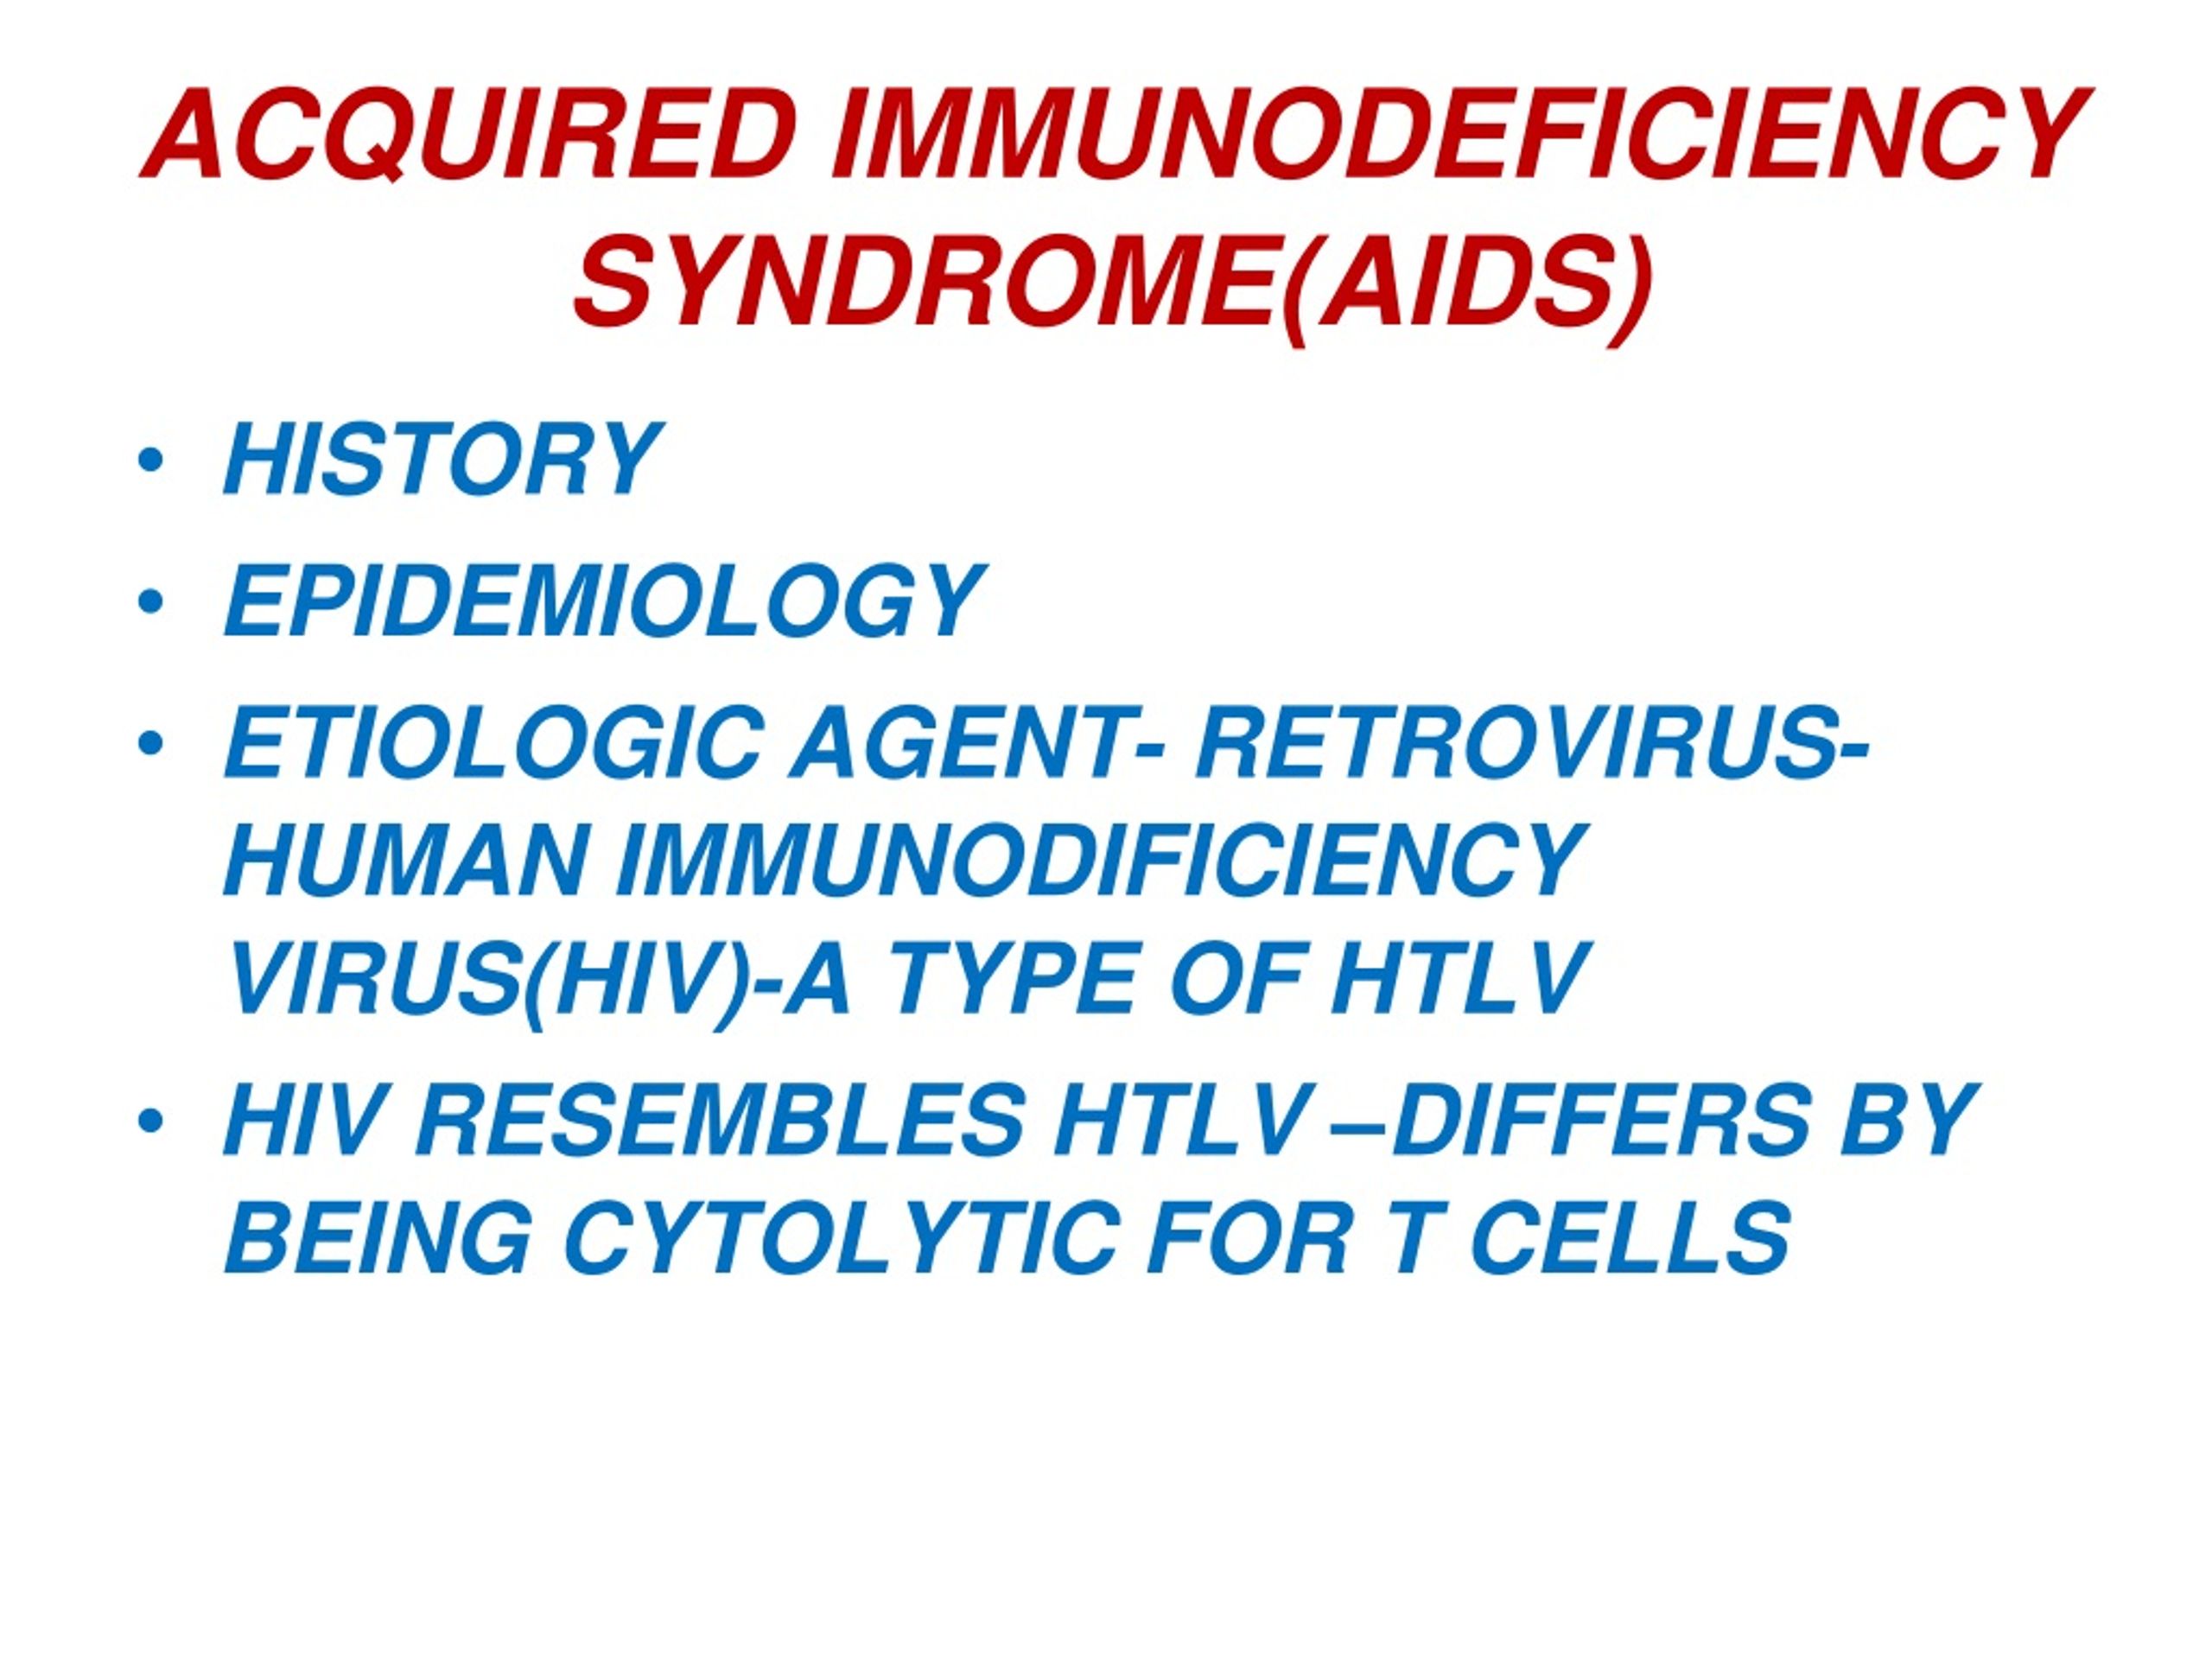 Ppt Acquired Immunodeficiency Syndromeaids Powerpoint Presentation Id9234037 6706